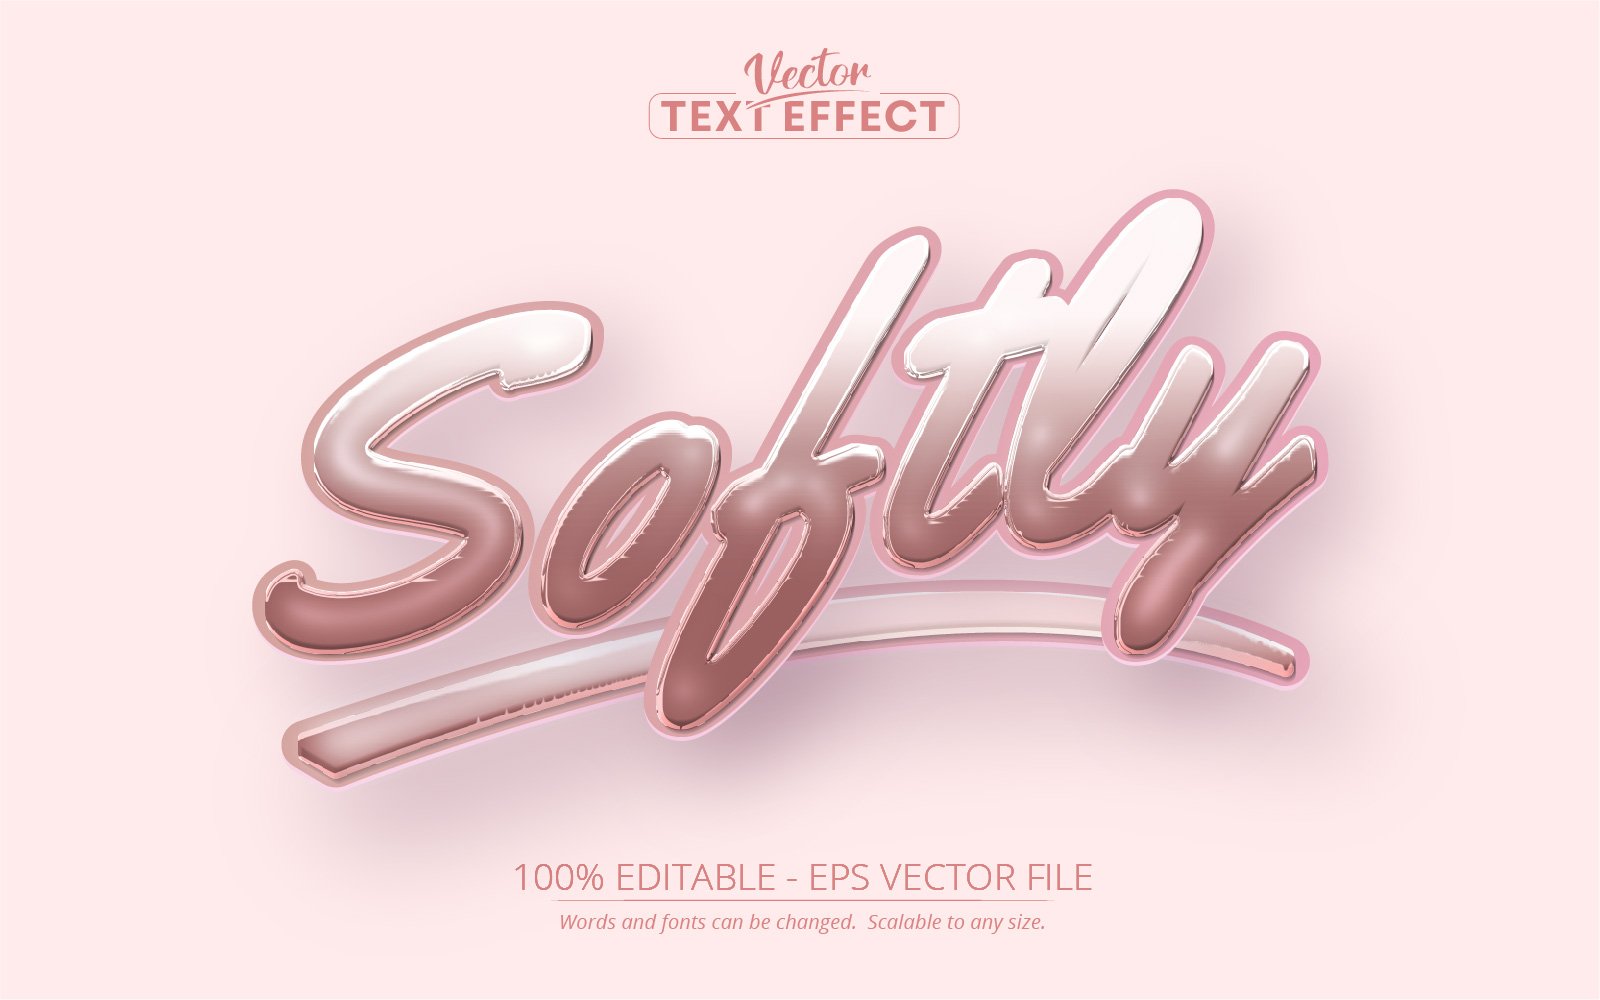 Softly - Editable Text Effect, Minimalistic Pink Color Text Style, Graphics Illustration